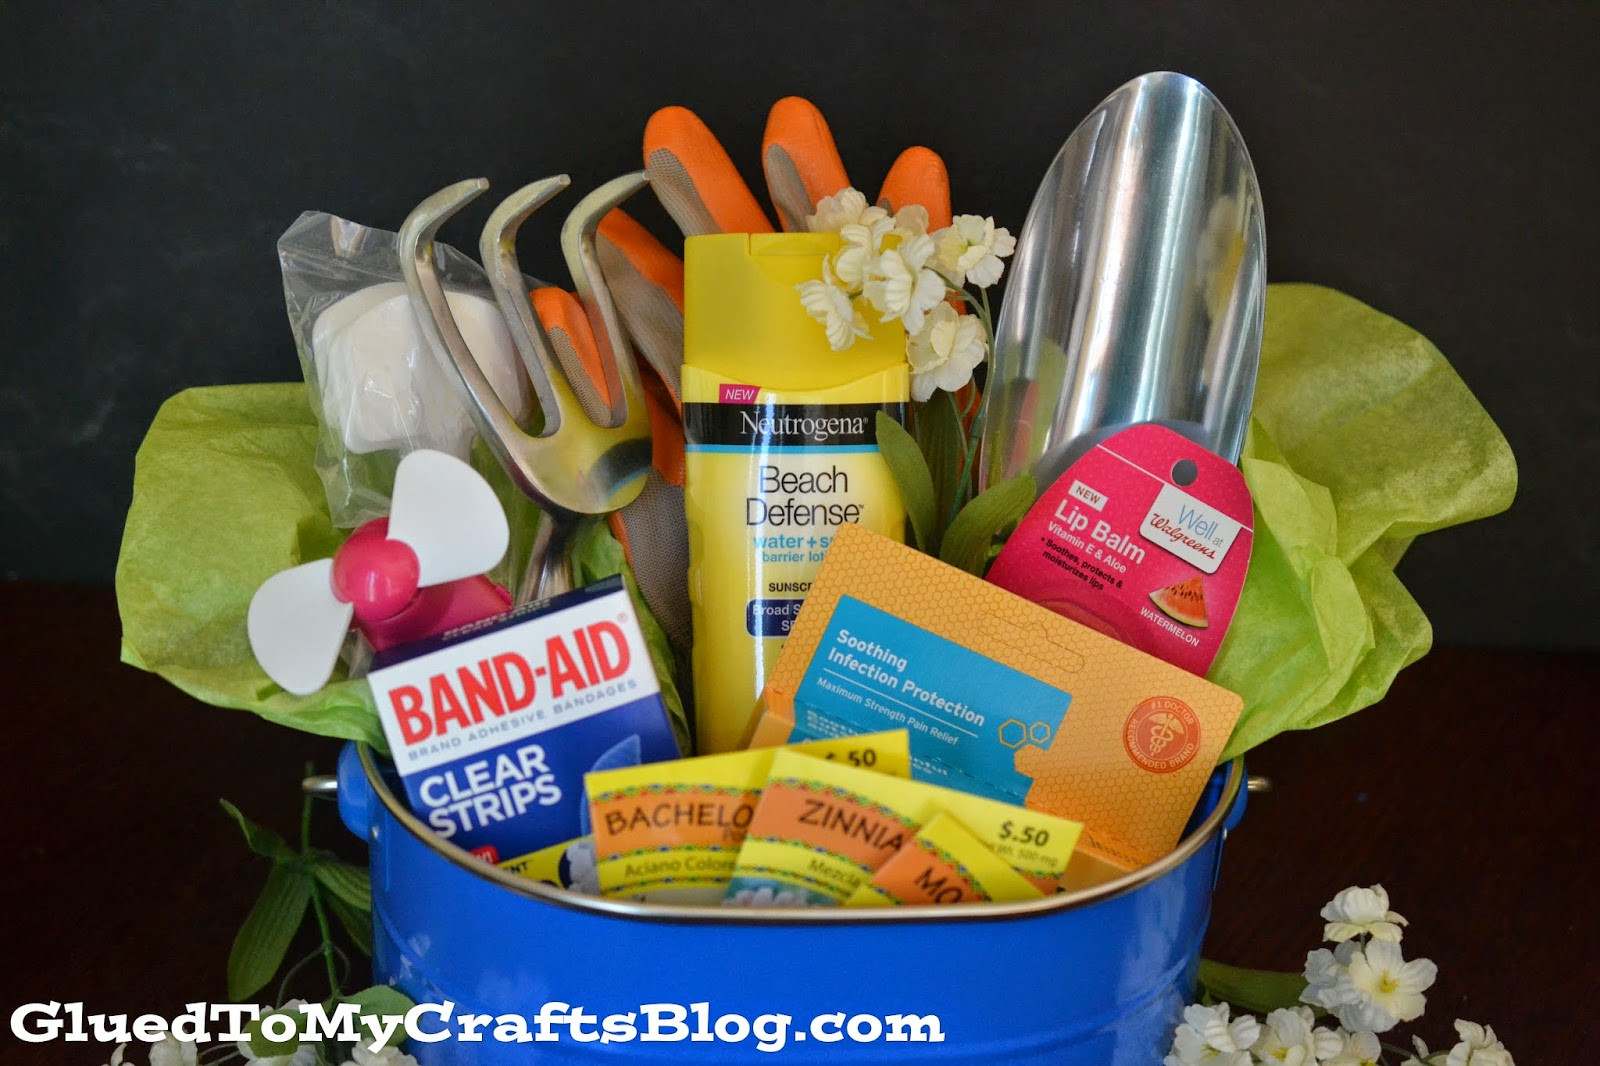 Best ideas about Garden Gift Baskets Ideas
. Save or Pin Celebrate The Gardener In Your Life Gift Basket Idea Now.